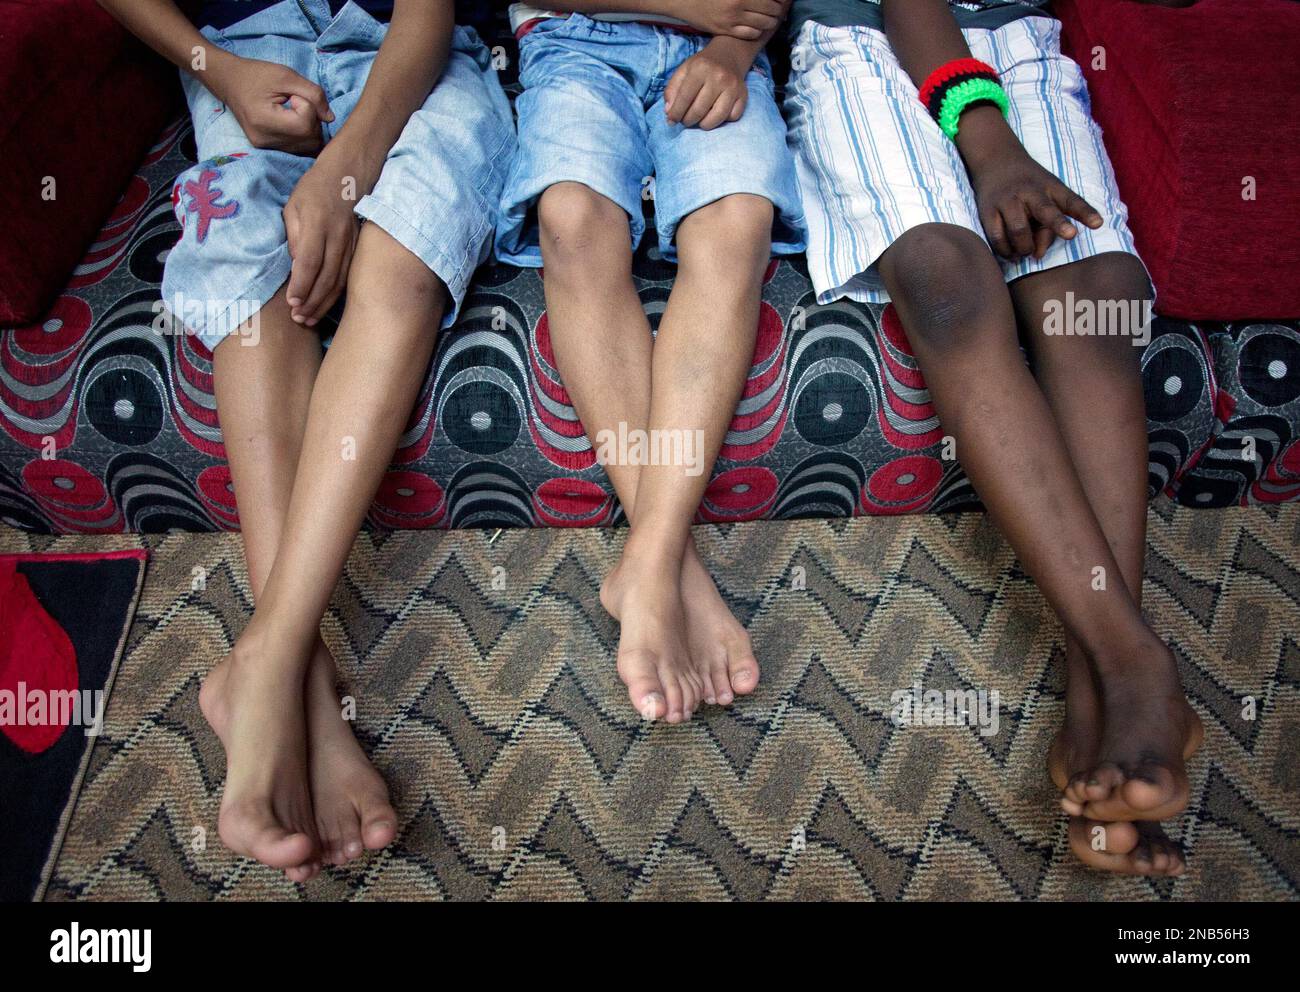 Boys watch television before dinner at an orphanage in Misrata, Libya,  Thursday, Sept. 29, 2011. (AP Photo/Manu Brabo Stock Photo - Alamy